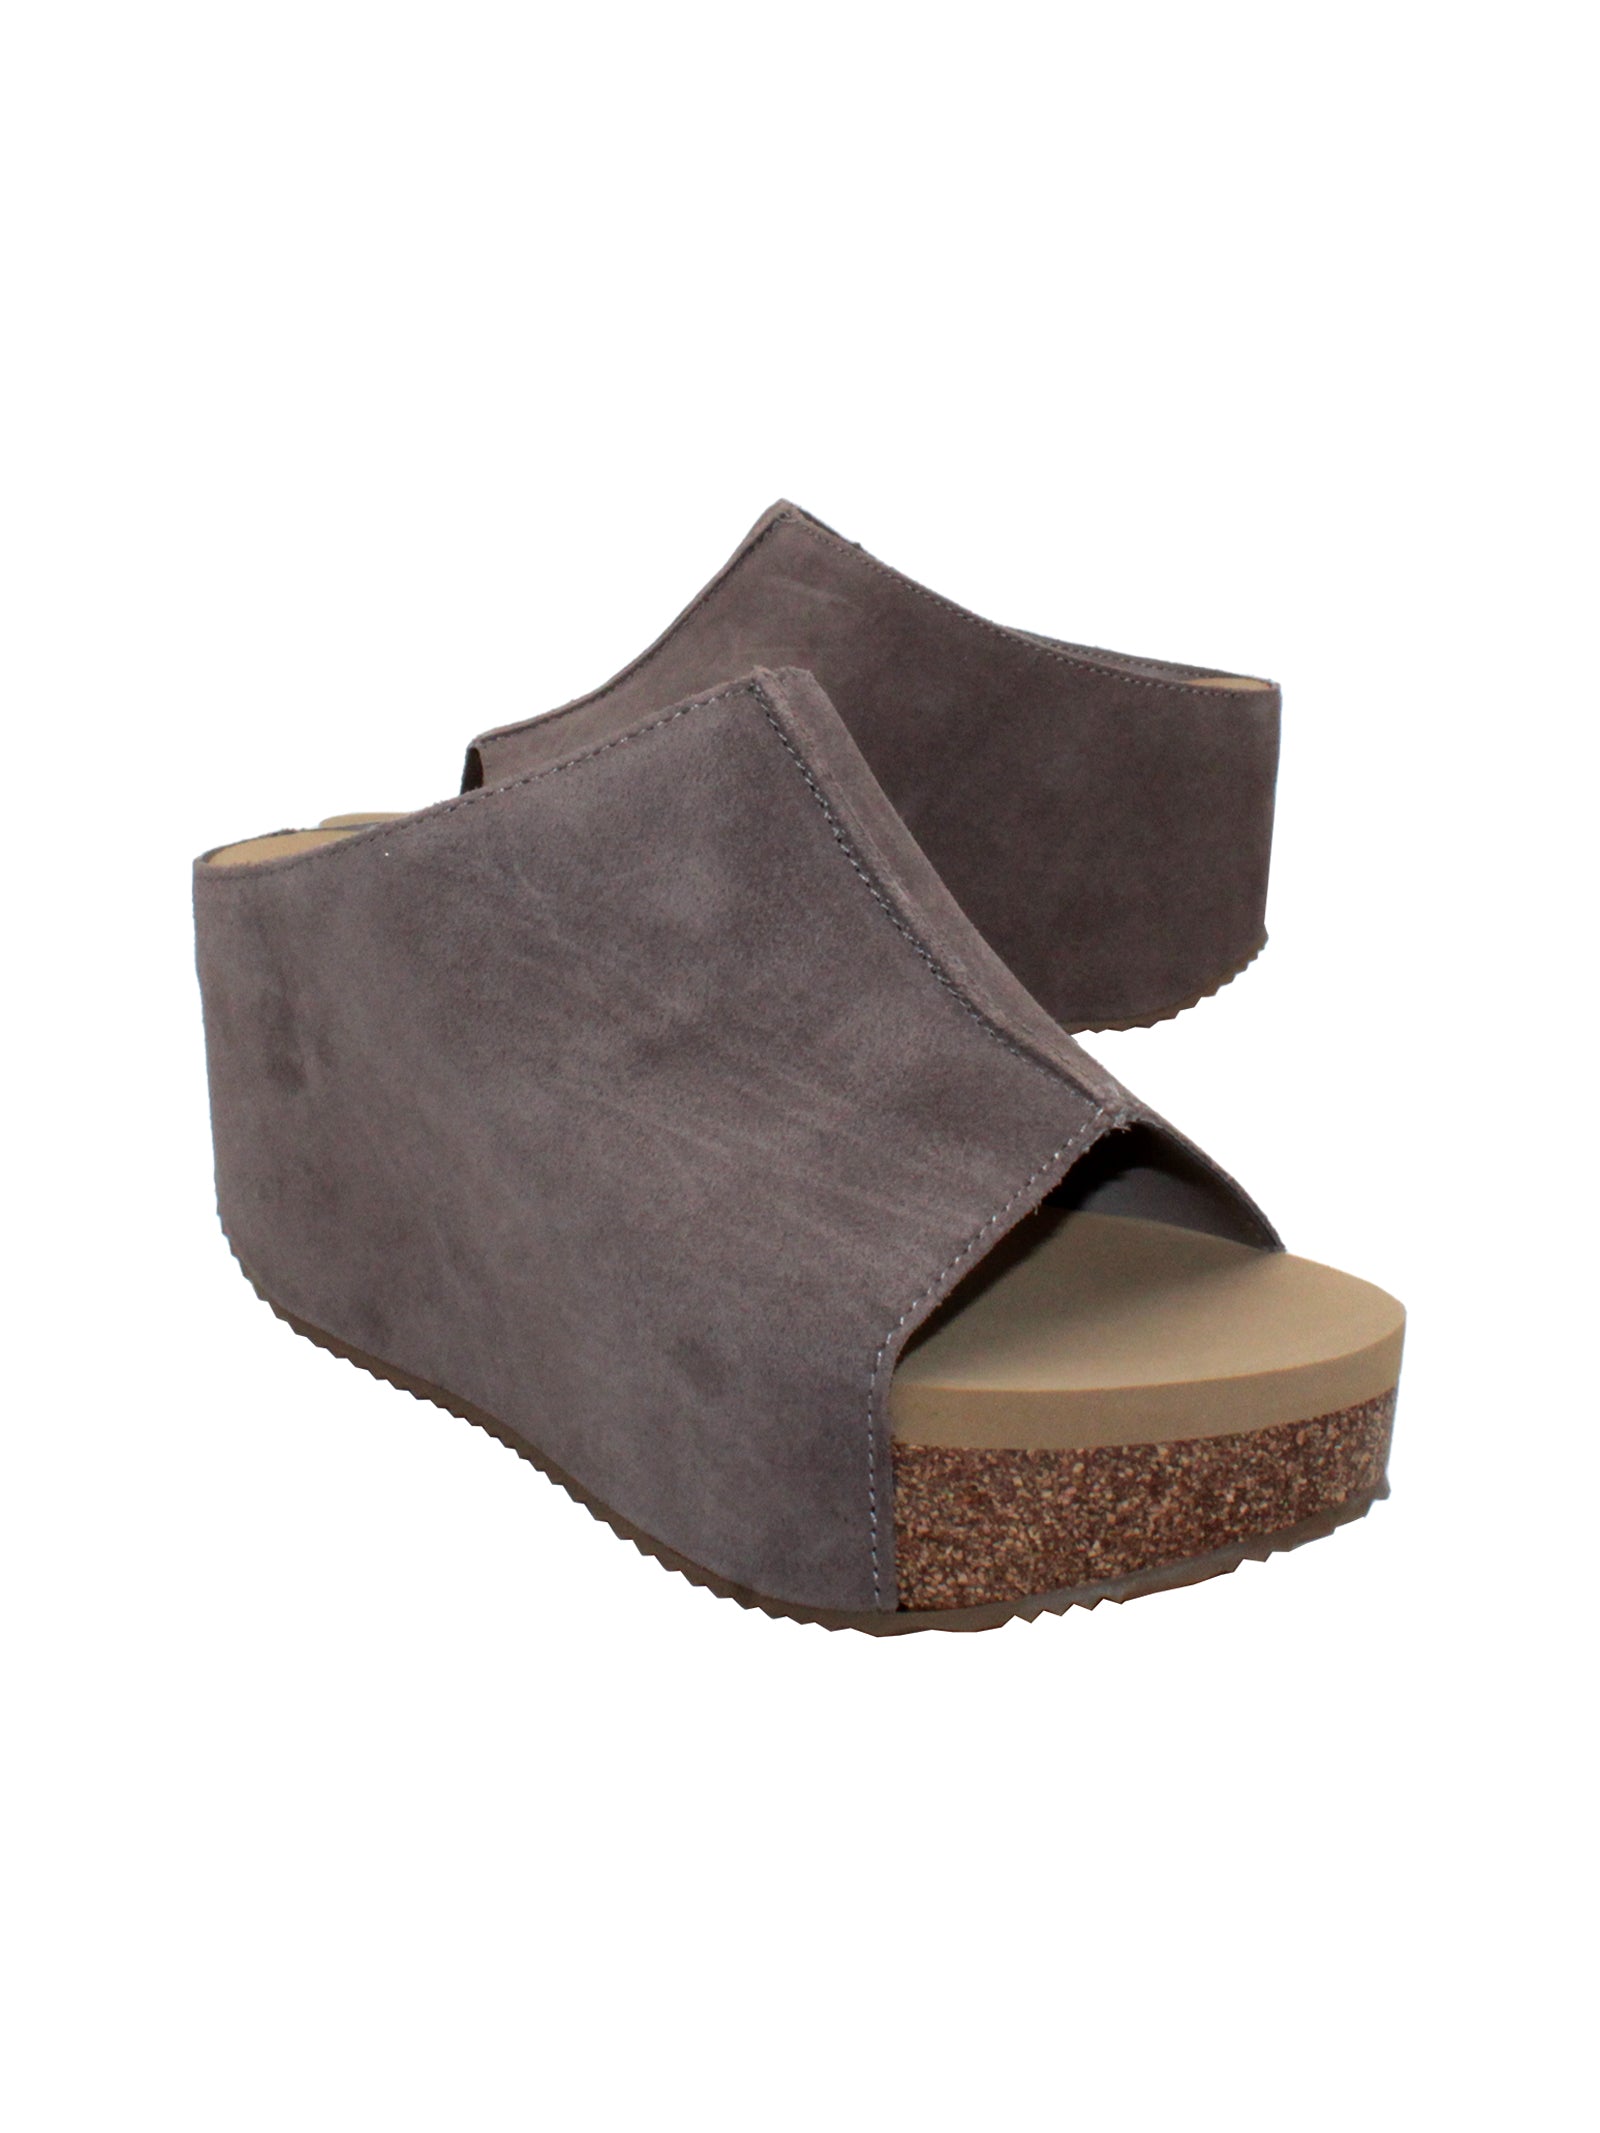 SLIP ON PEEP TOE WEDGE - Suede, hair calf, metallic tonal camo, faux snake upper with butted center seam and inner elastic gore for perfect fit - Slip on design - Leather lining - Signature ultra comfort EVA insole - Rubber traction outsole - Approx. 0.75" platform height - Approx. 2.75" wedge heel height taupe2